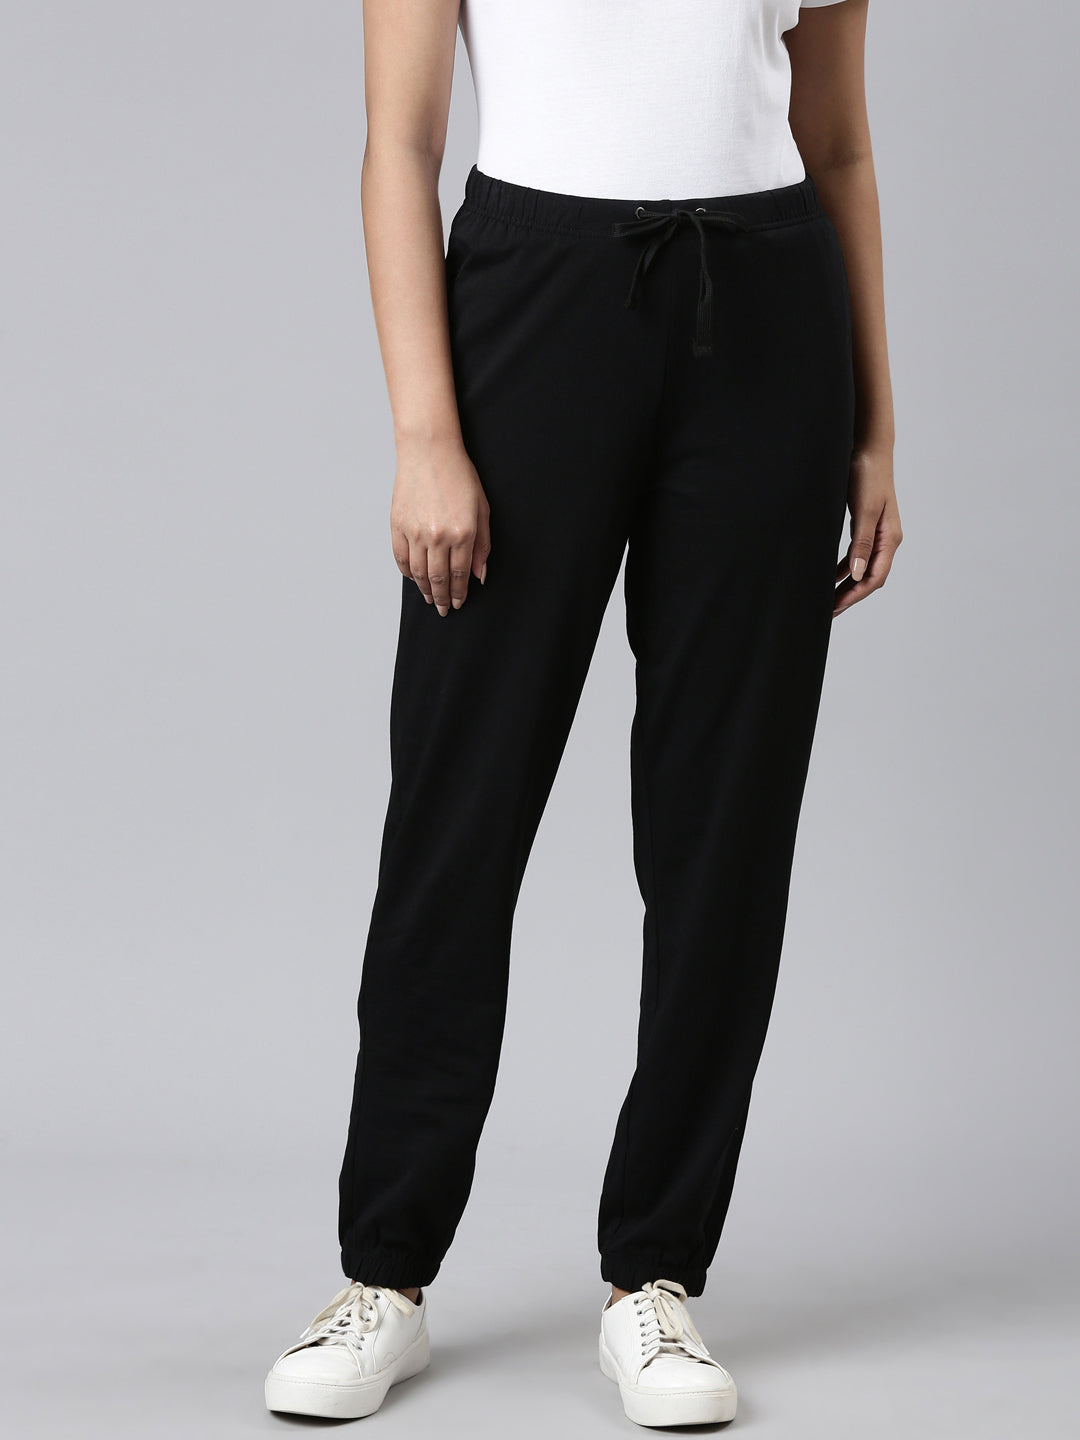 Women Solid Black Mid Rise Cotton Casual Joggers